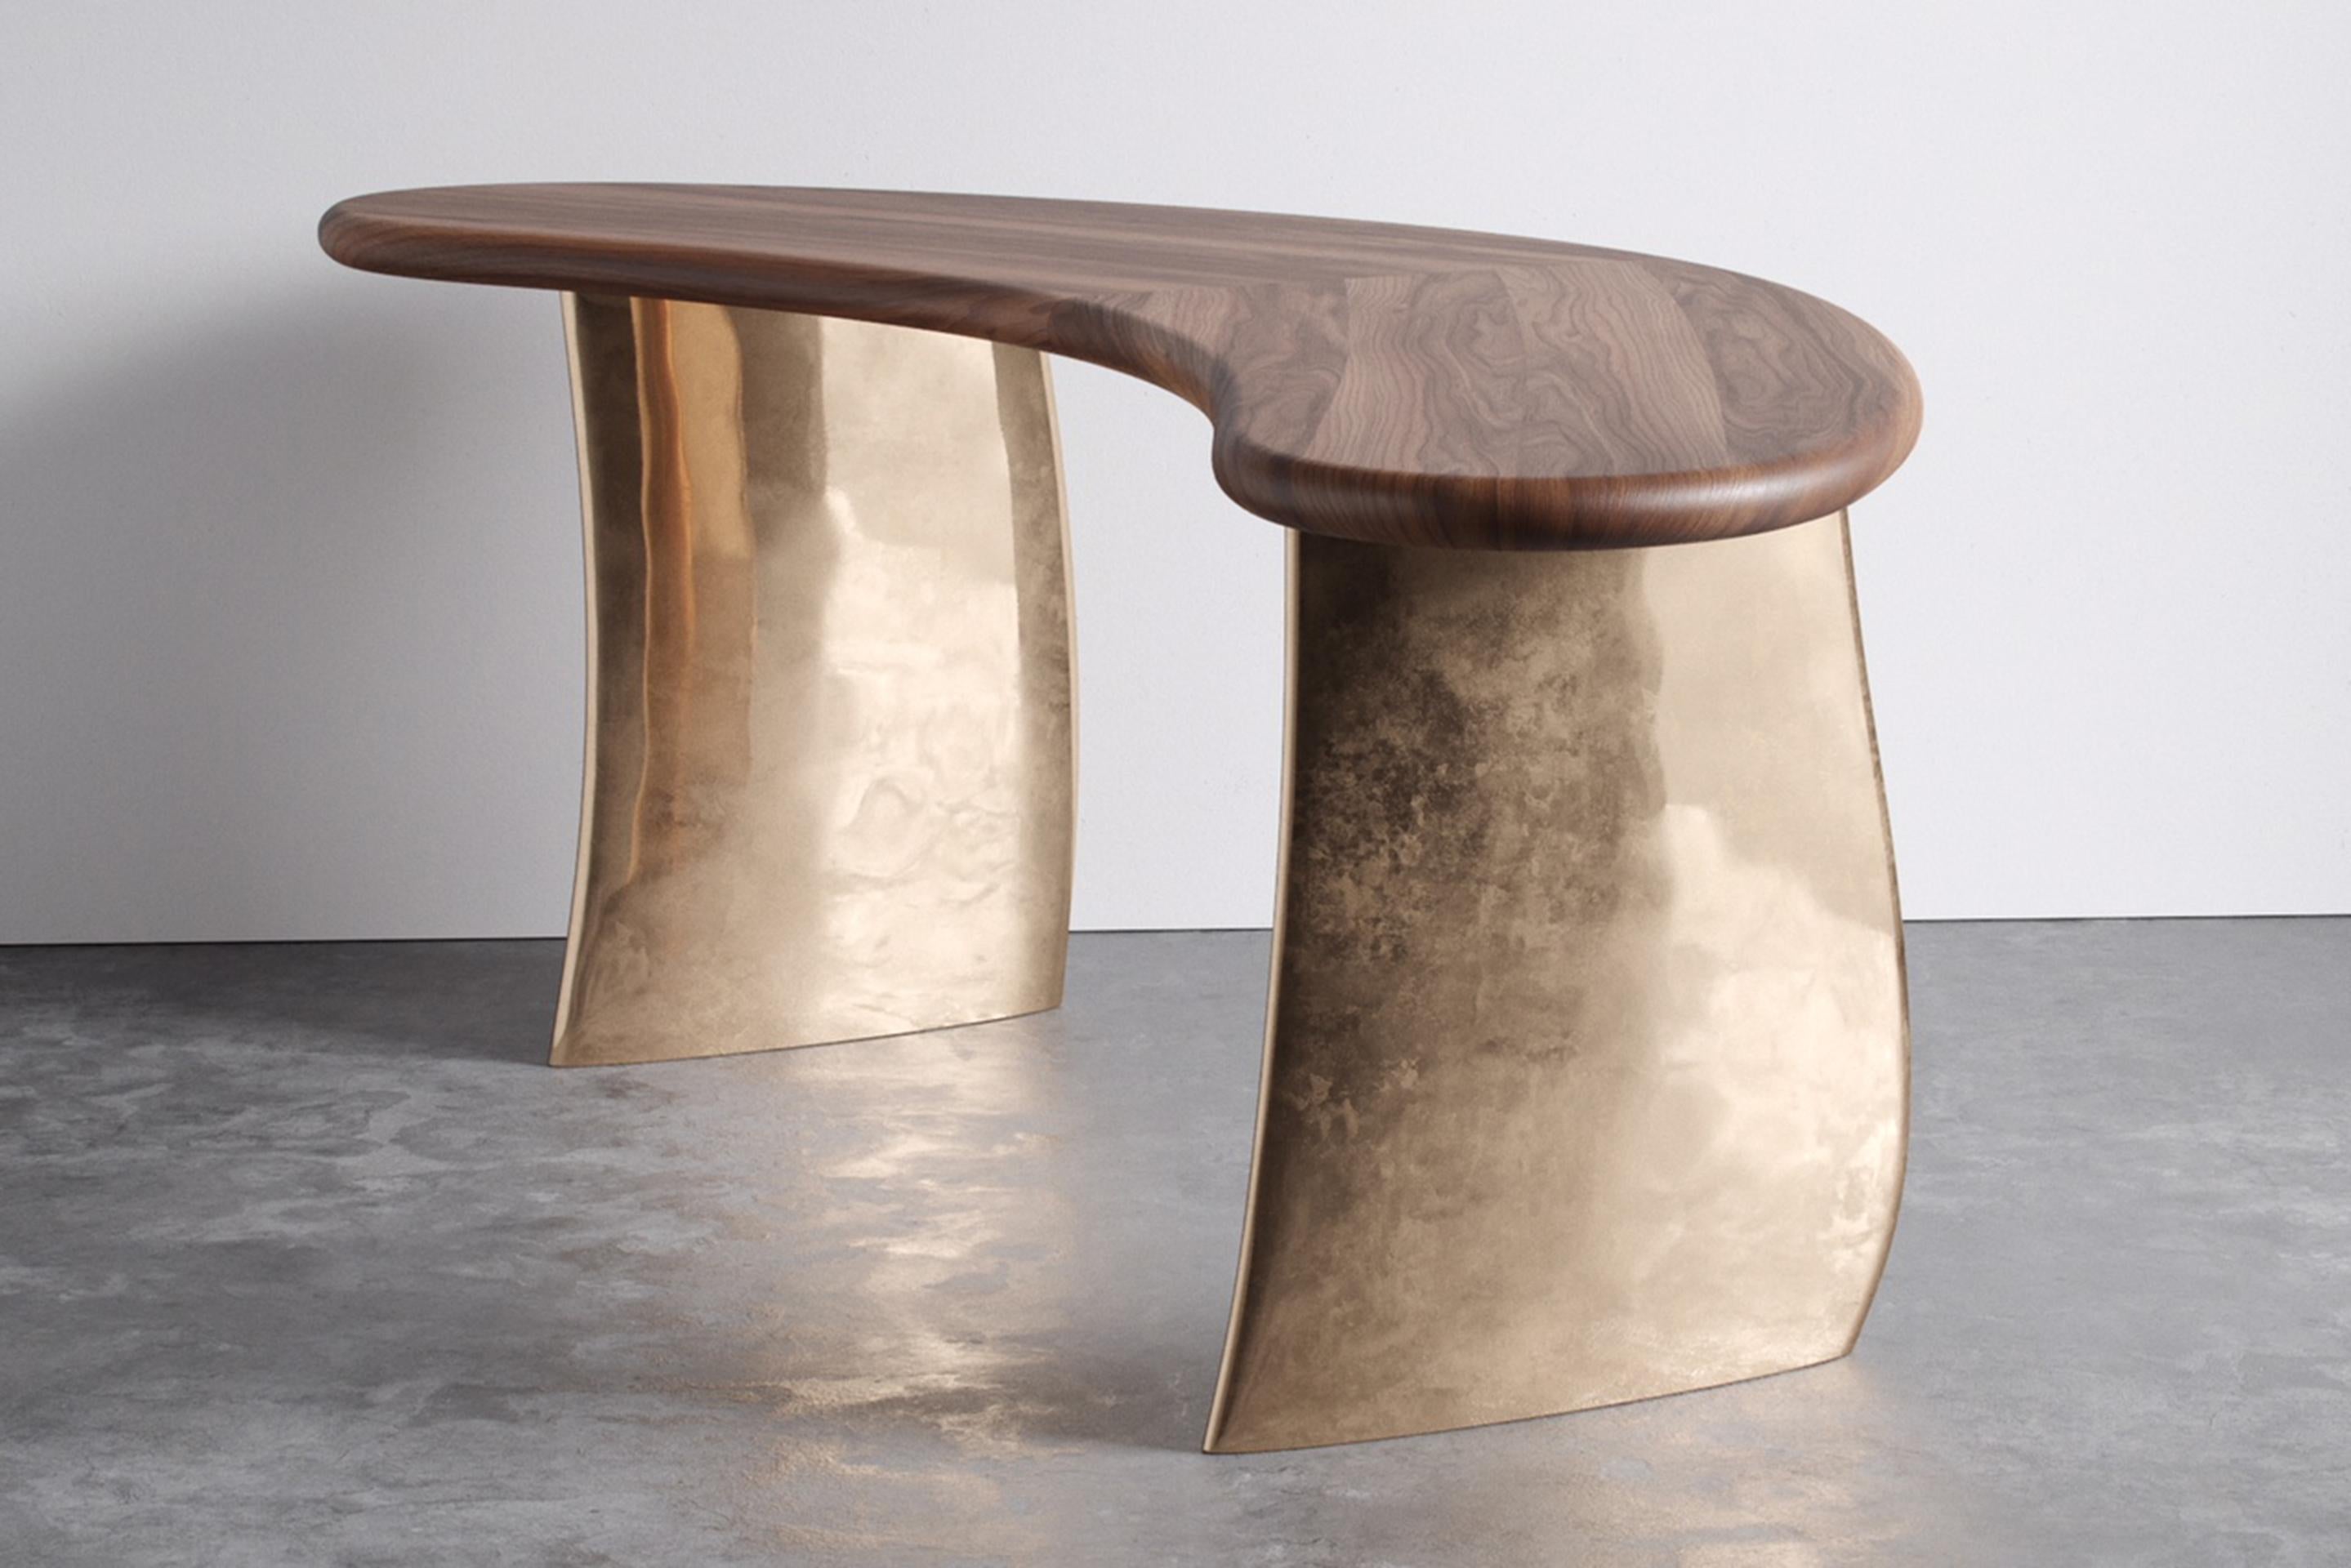 Kaimana desk by Aguirre Design
Dimensions: L 213.4 x W 66 x H 76.2 cm
Materials: Clear solid walnut, polished cast bronze legs

A modern desk with natural characteristics. Solid walnut and cast bronze pedestals. It begins with two thick, cast